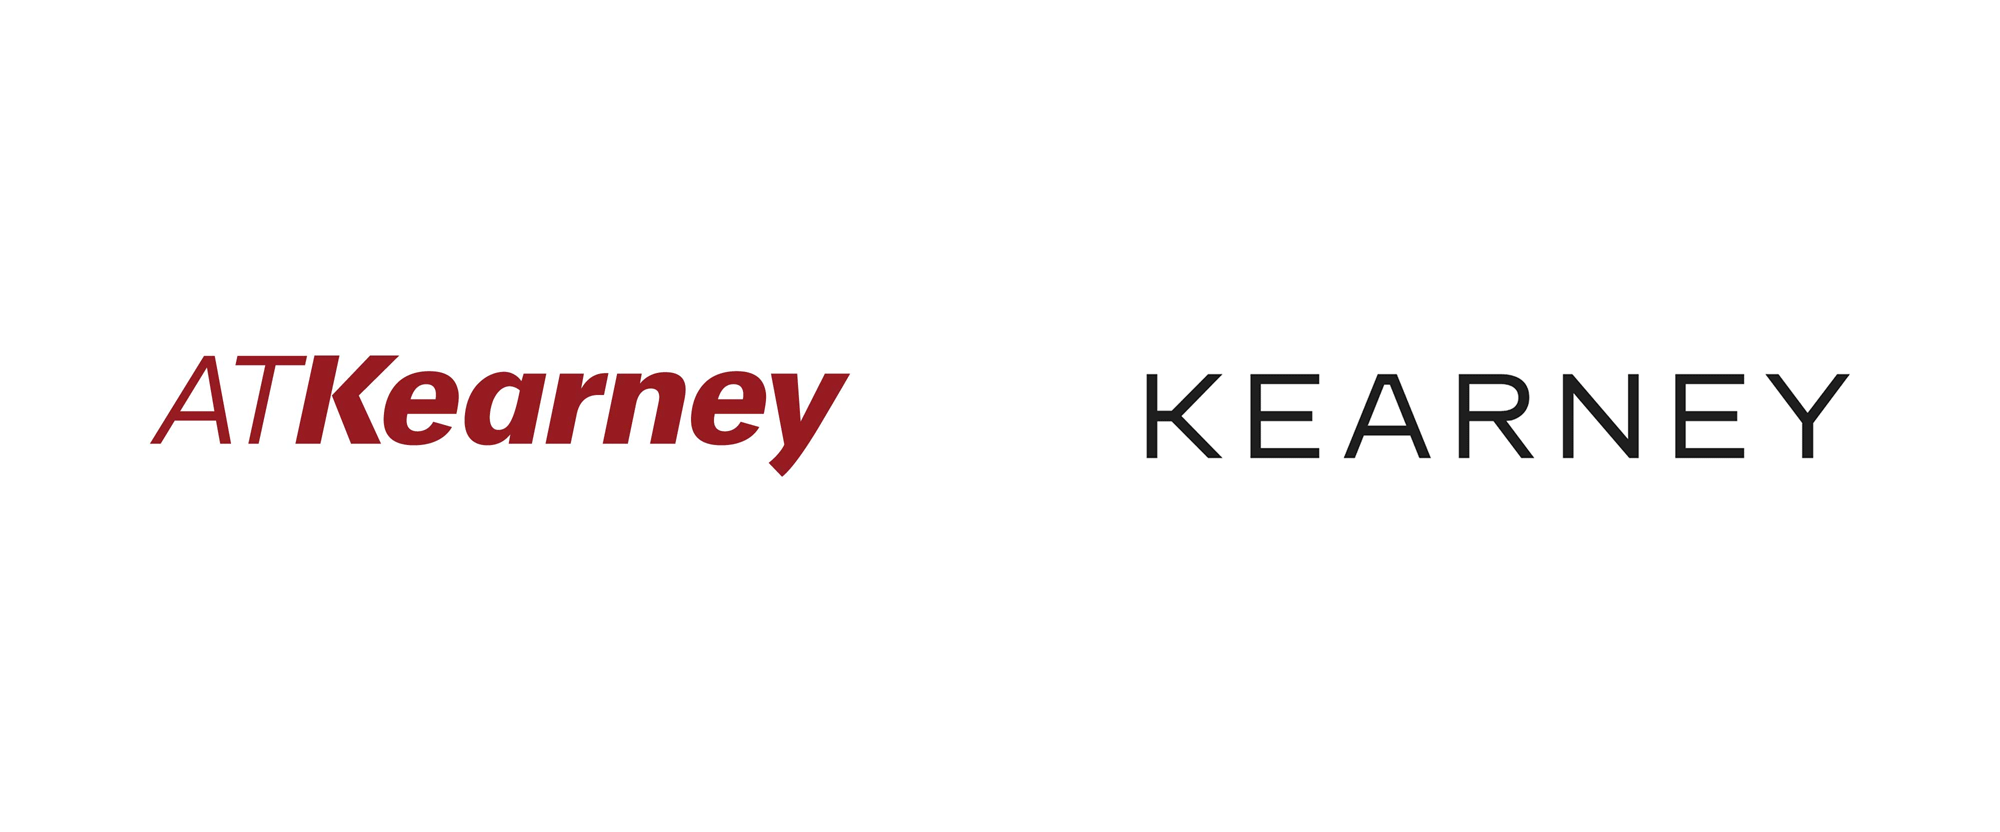 New Logo and Identity for Kearney by Siegel+Gale